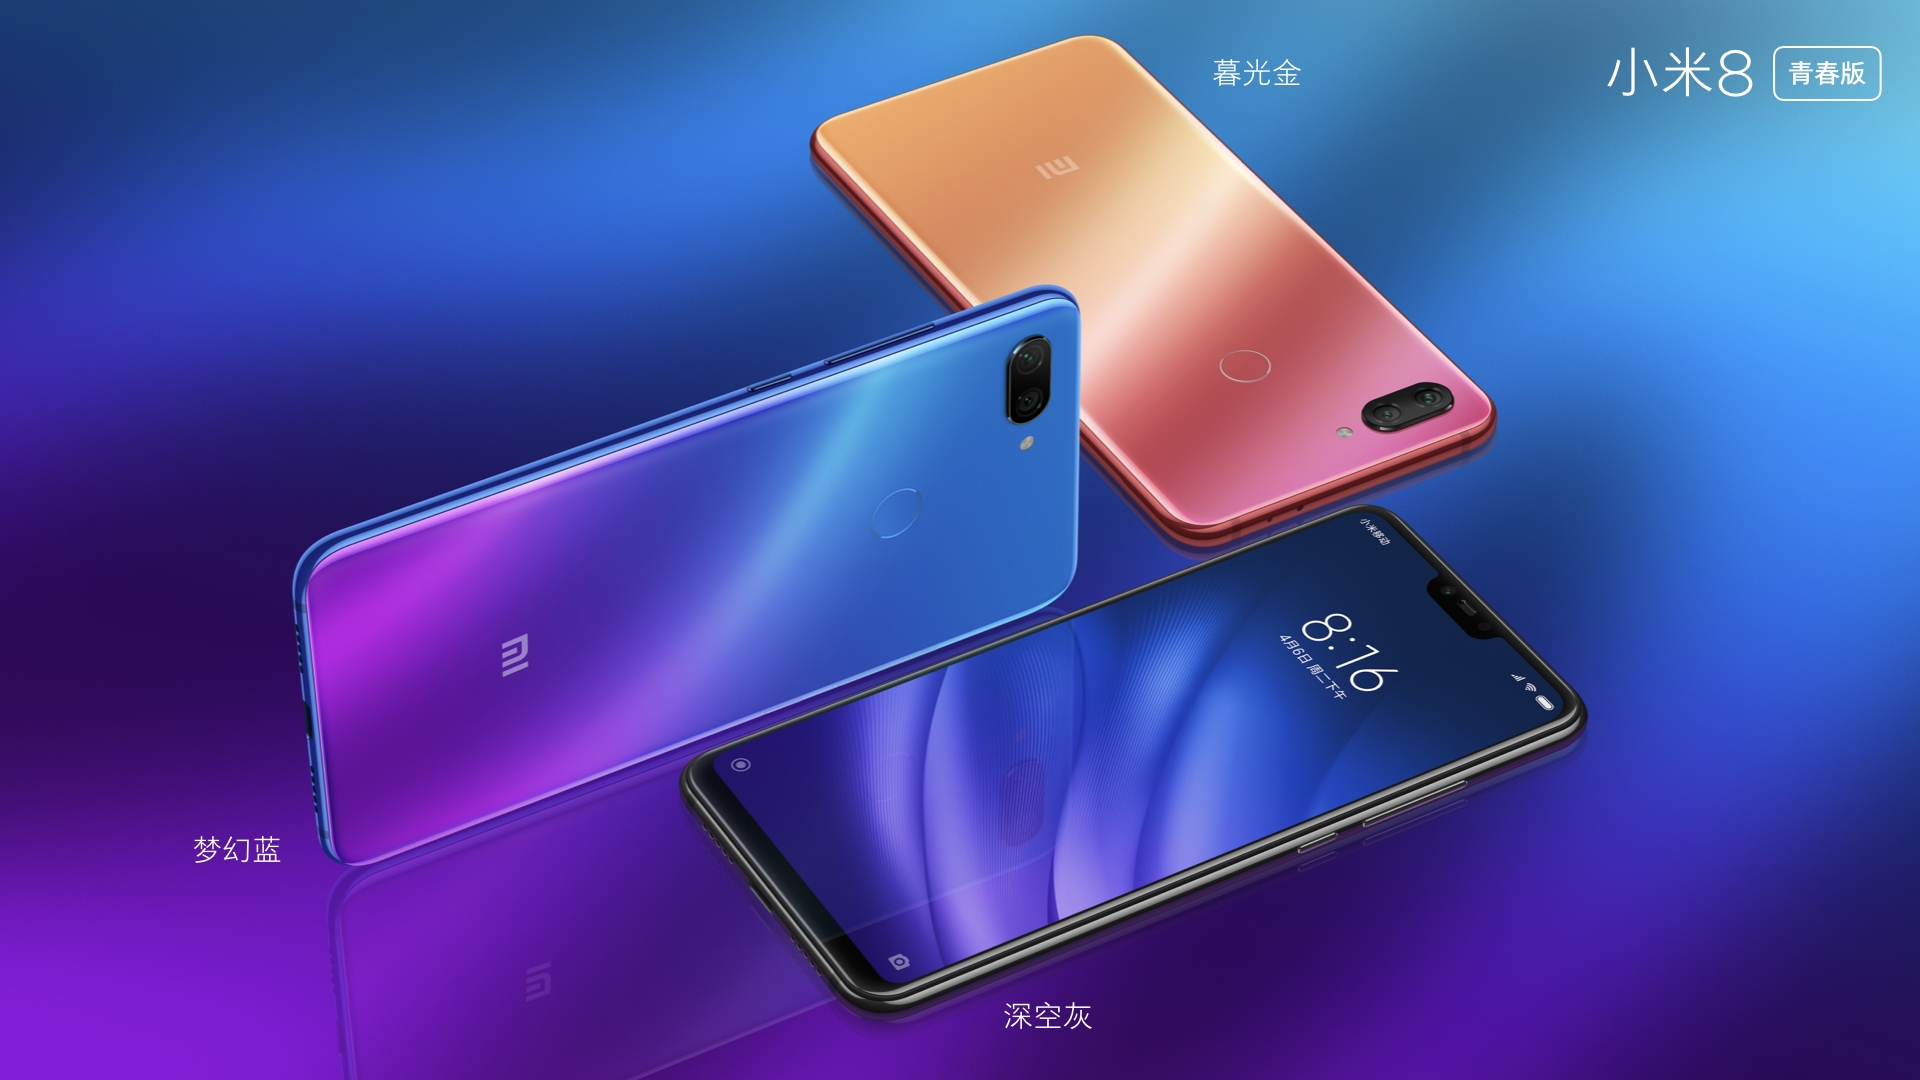 The Mi 8 Youth Edition in various colors.